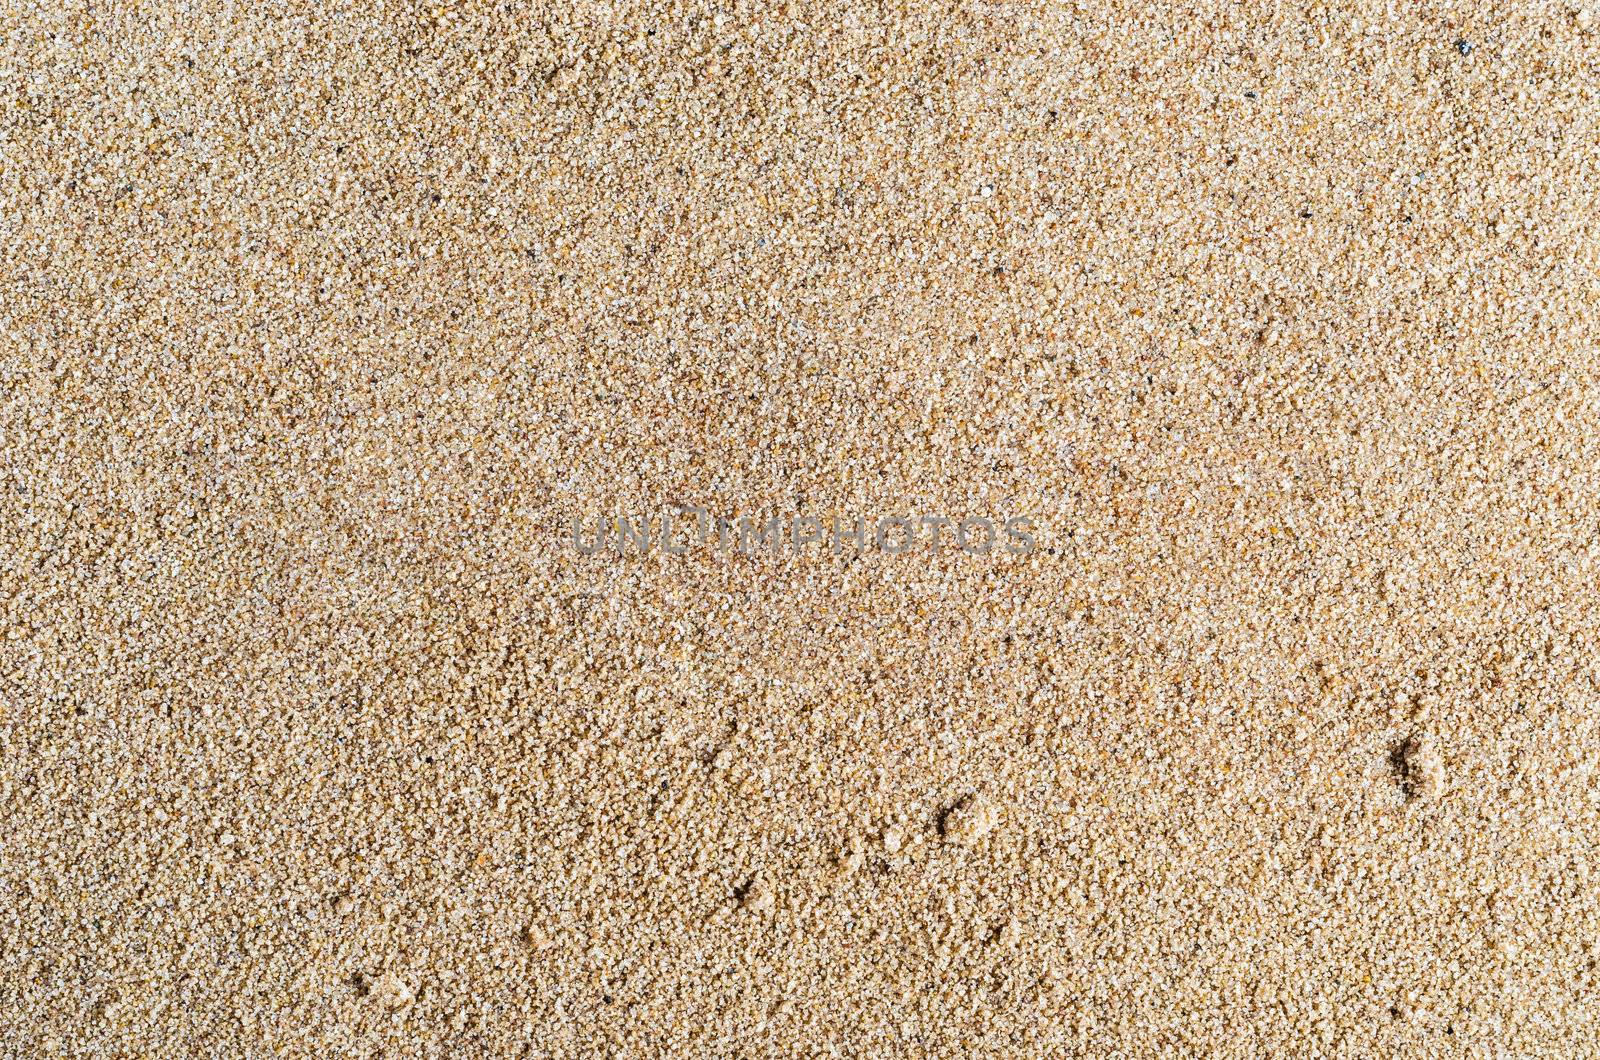 A background texture of unrefined, damp and grainy natural golden sand.